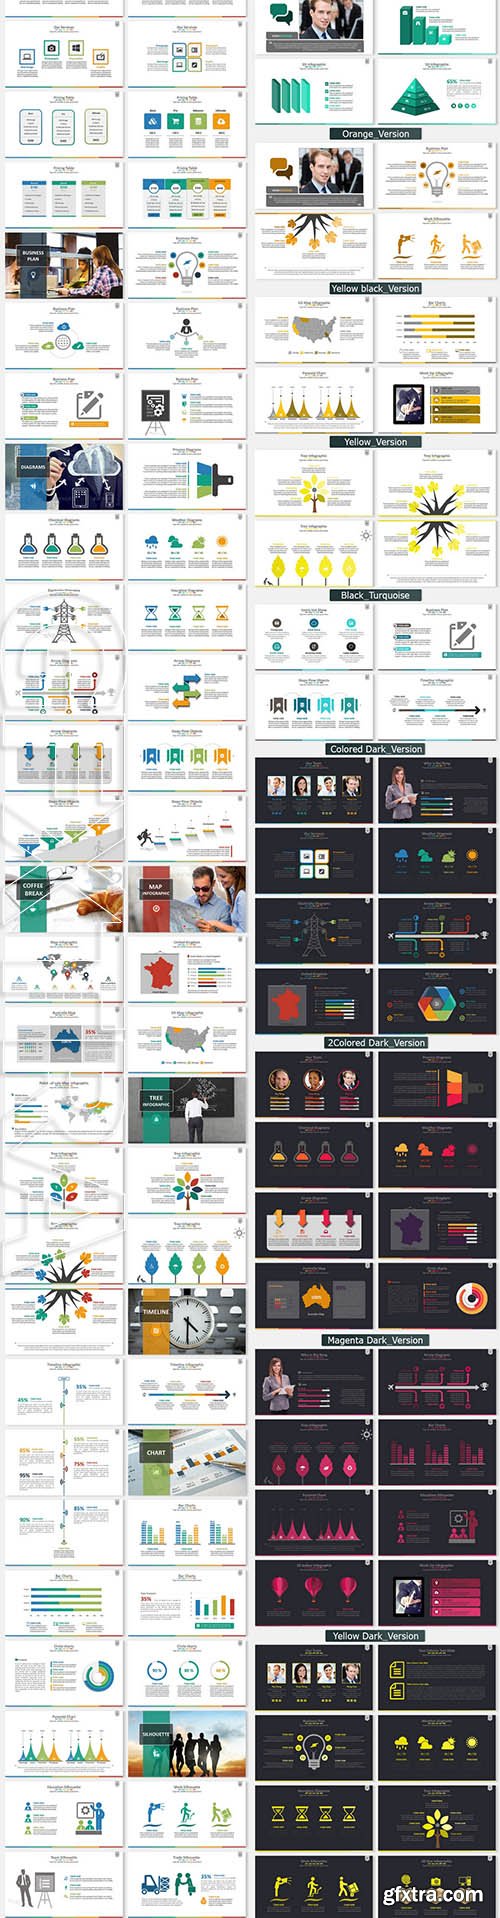 Business Holding Presentation Template - GraphicRiver 11168856